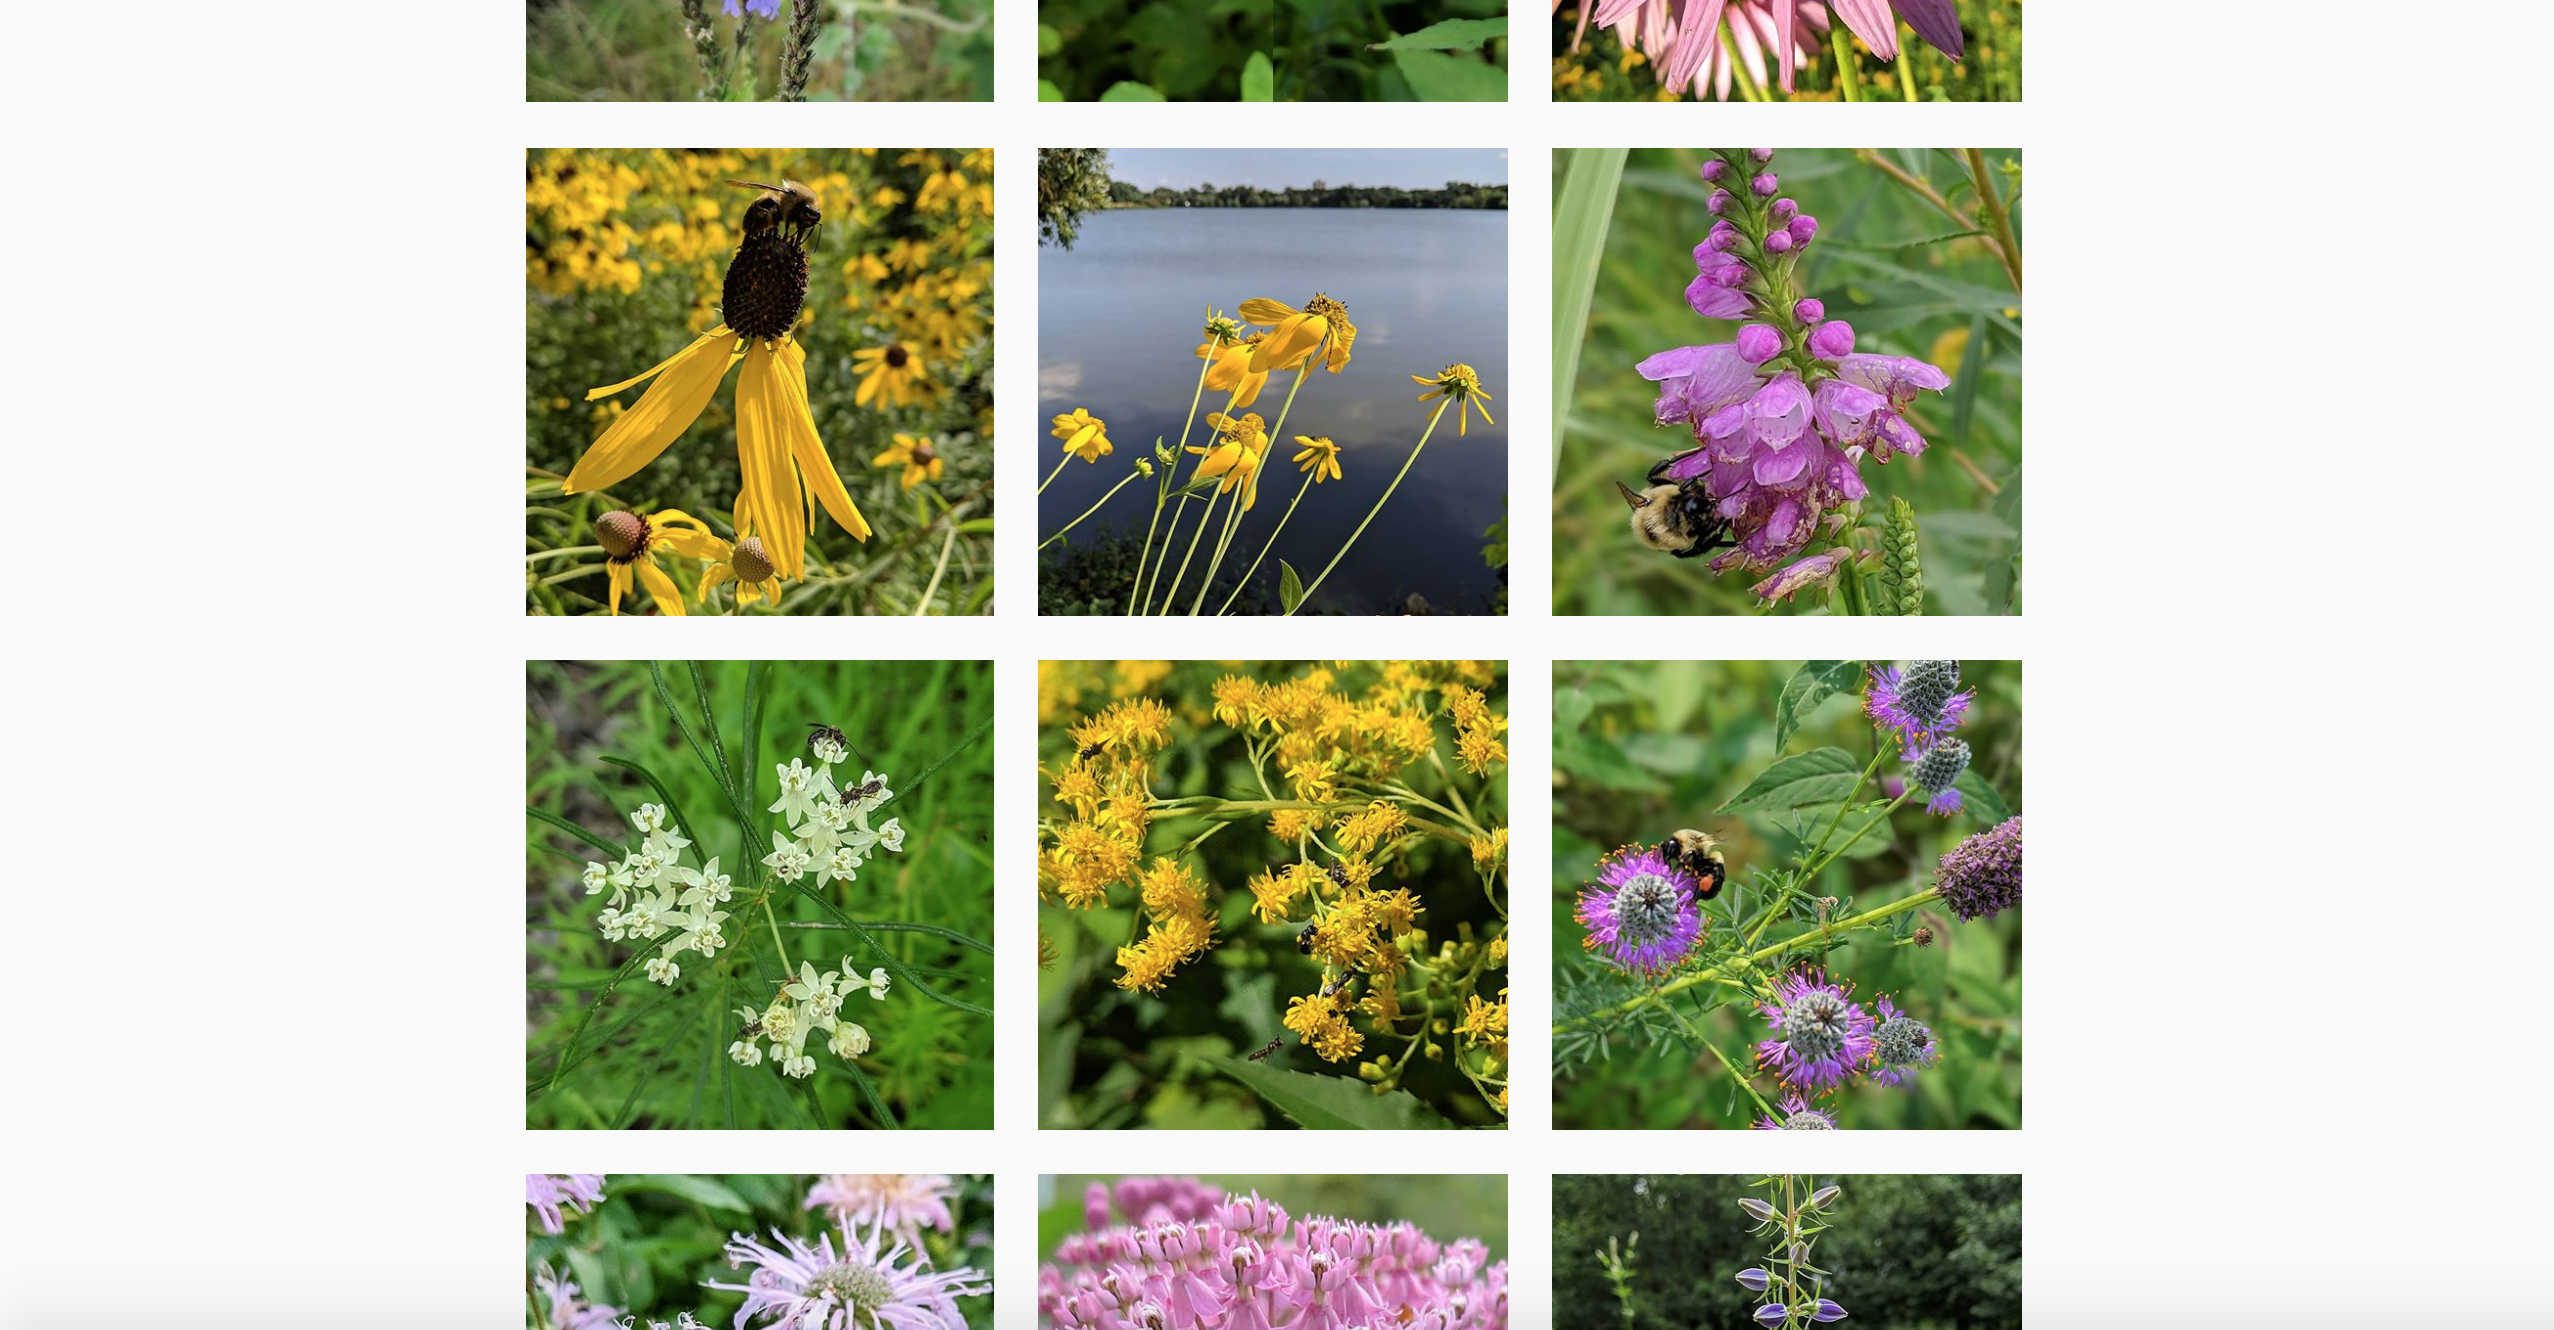 Screengrab of the Big River Big Woods Instagram feed during the summer, with photos of blooming flowers.